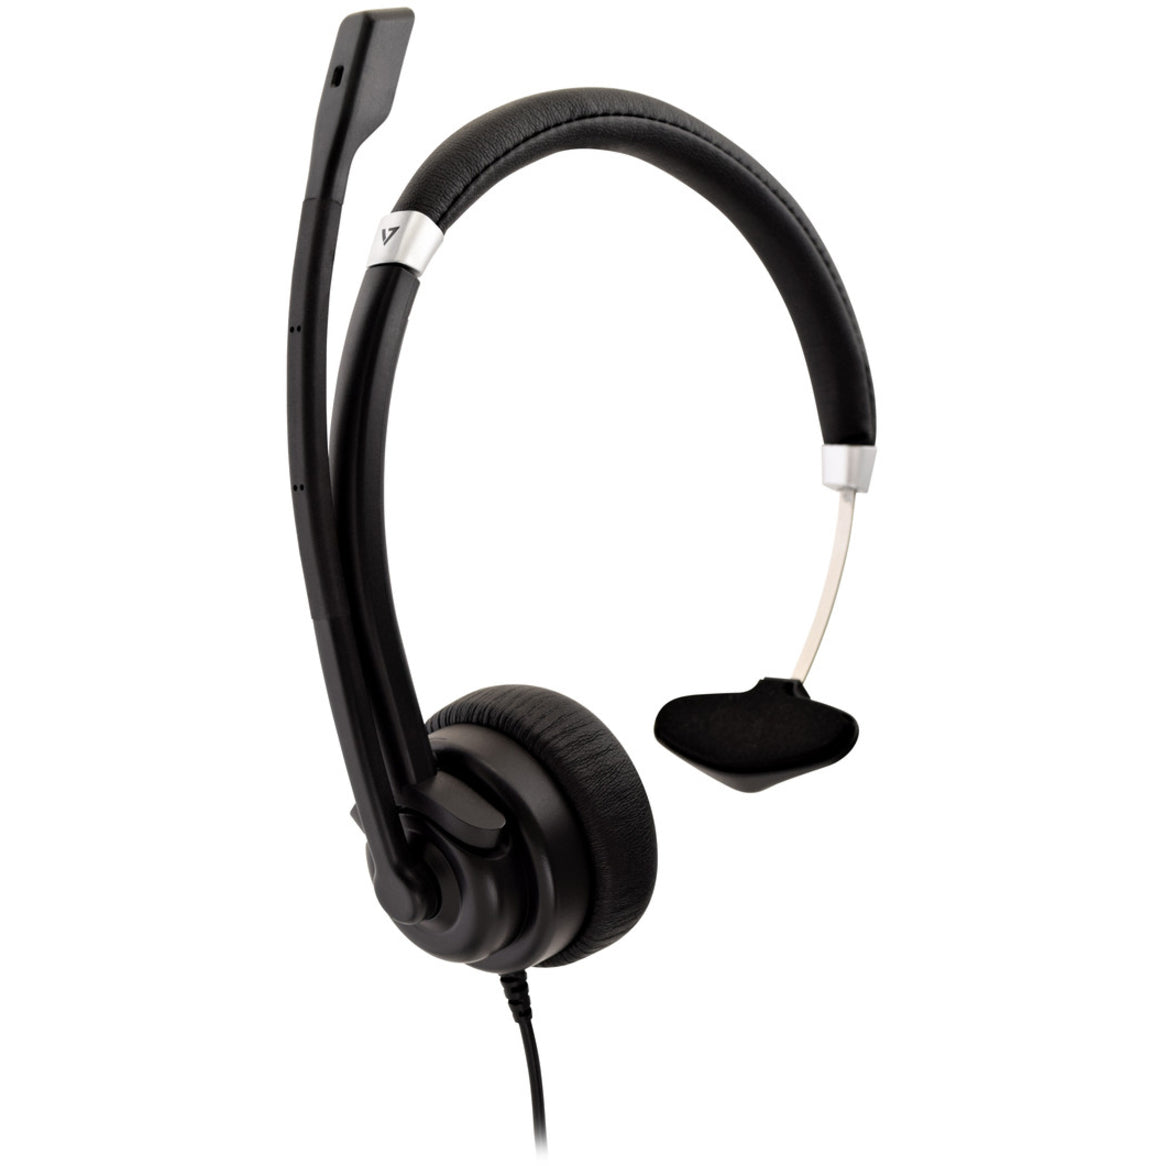 V7 HA401 Deluxe Mono Headset, Over-the-head Wired Headset with Noise Cancelling Microphone